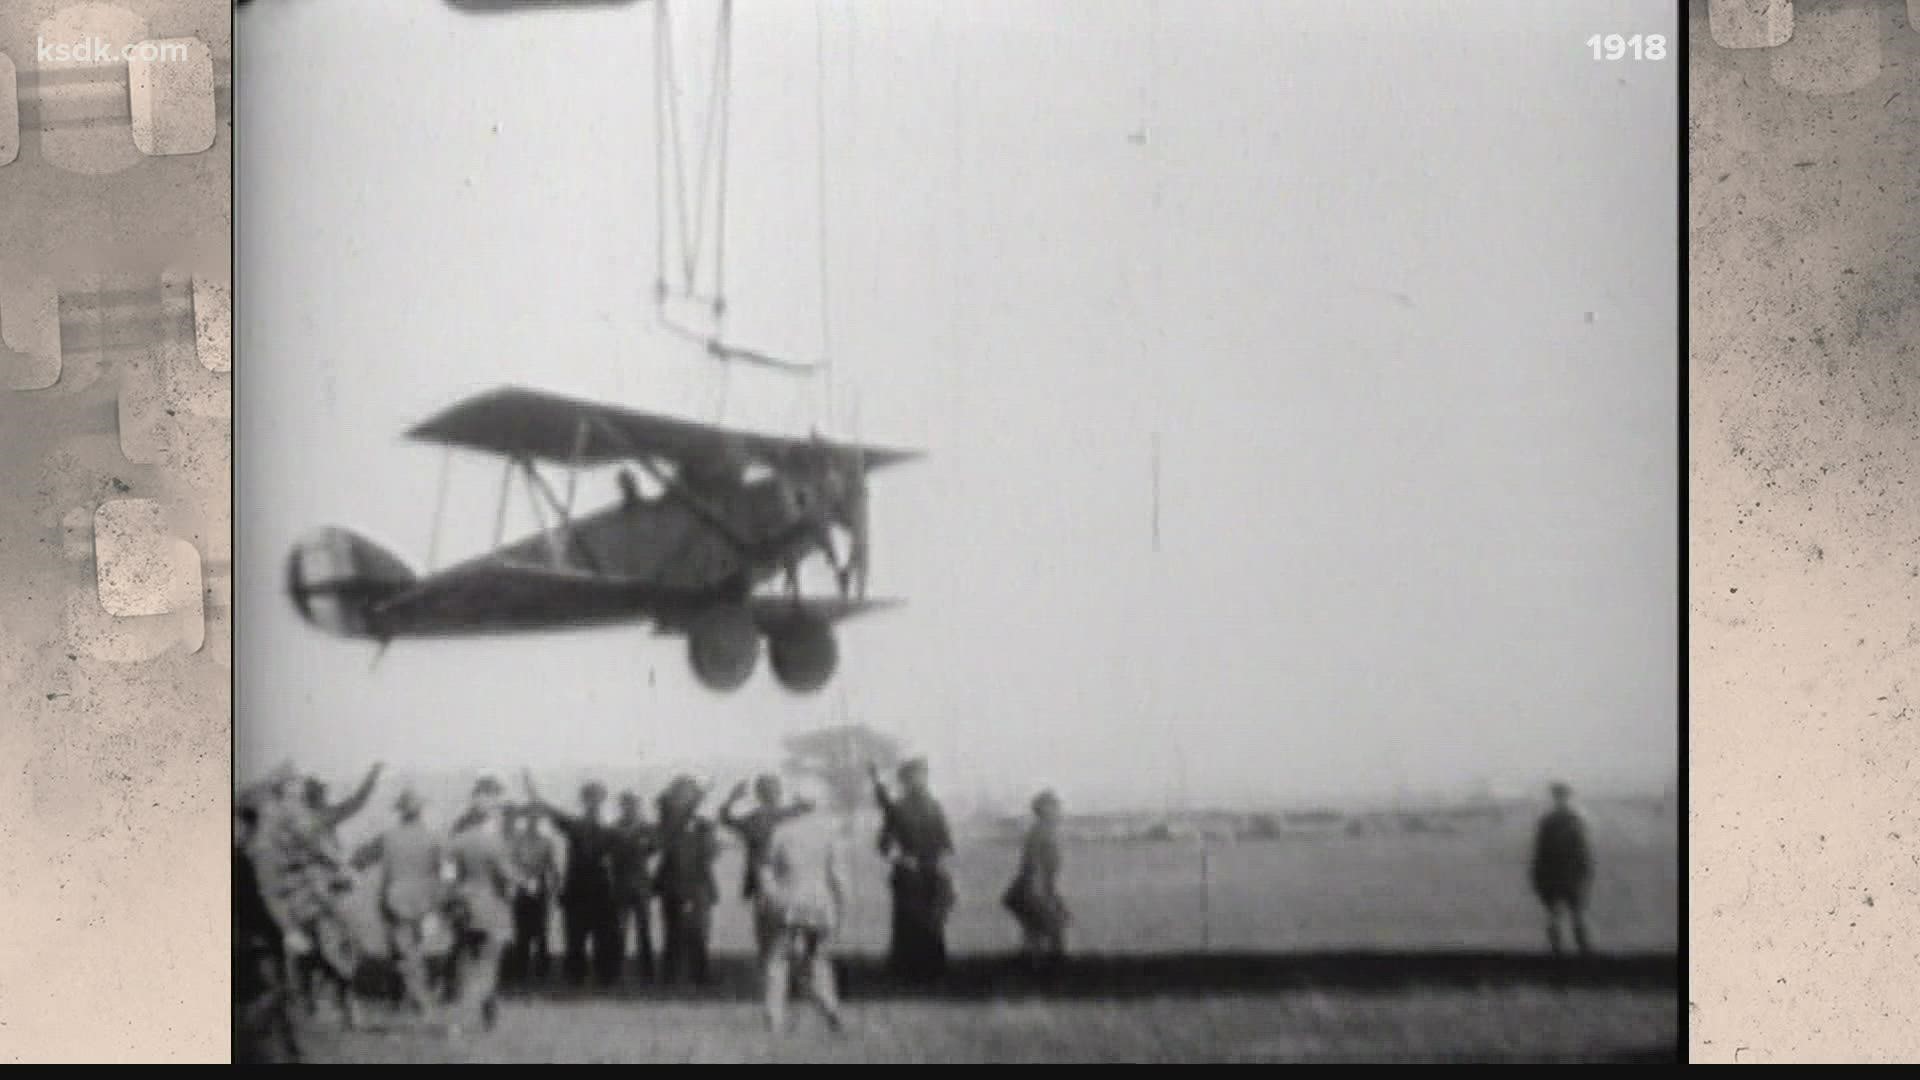 The footage shows what is believed to be the first aerial film shot in St. Louis